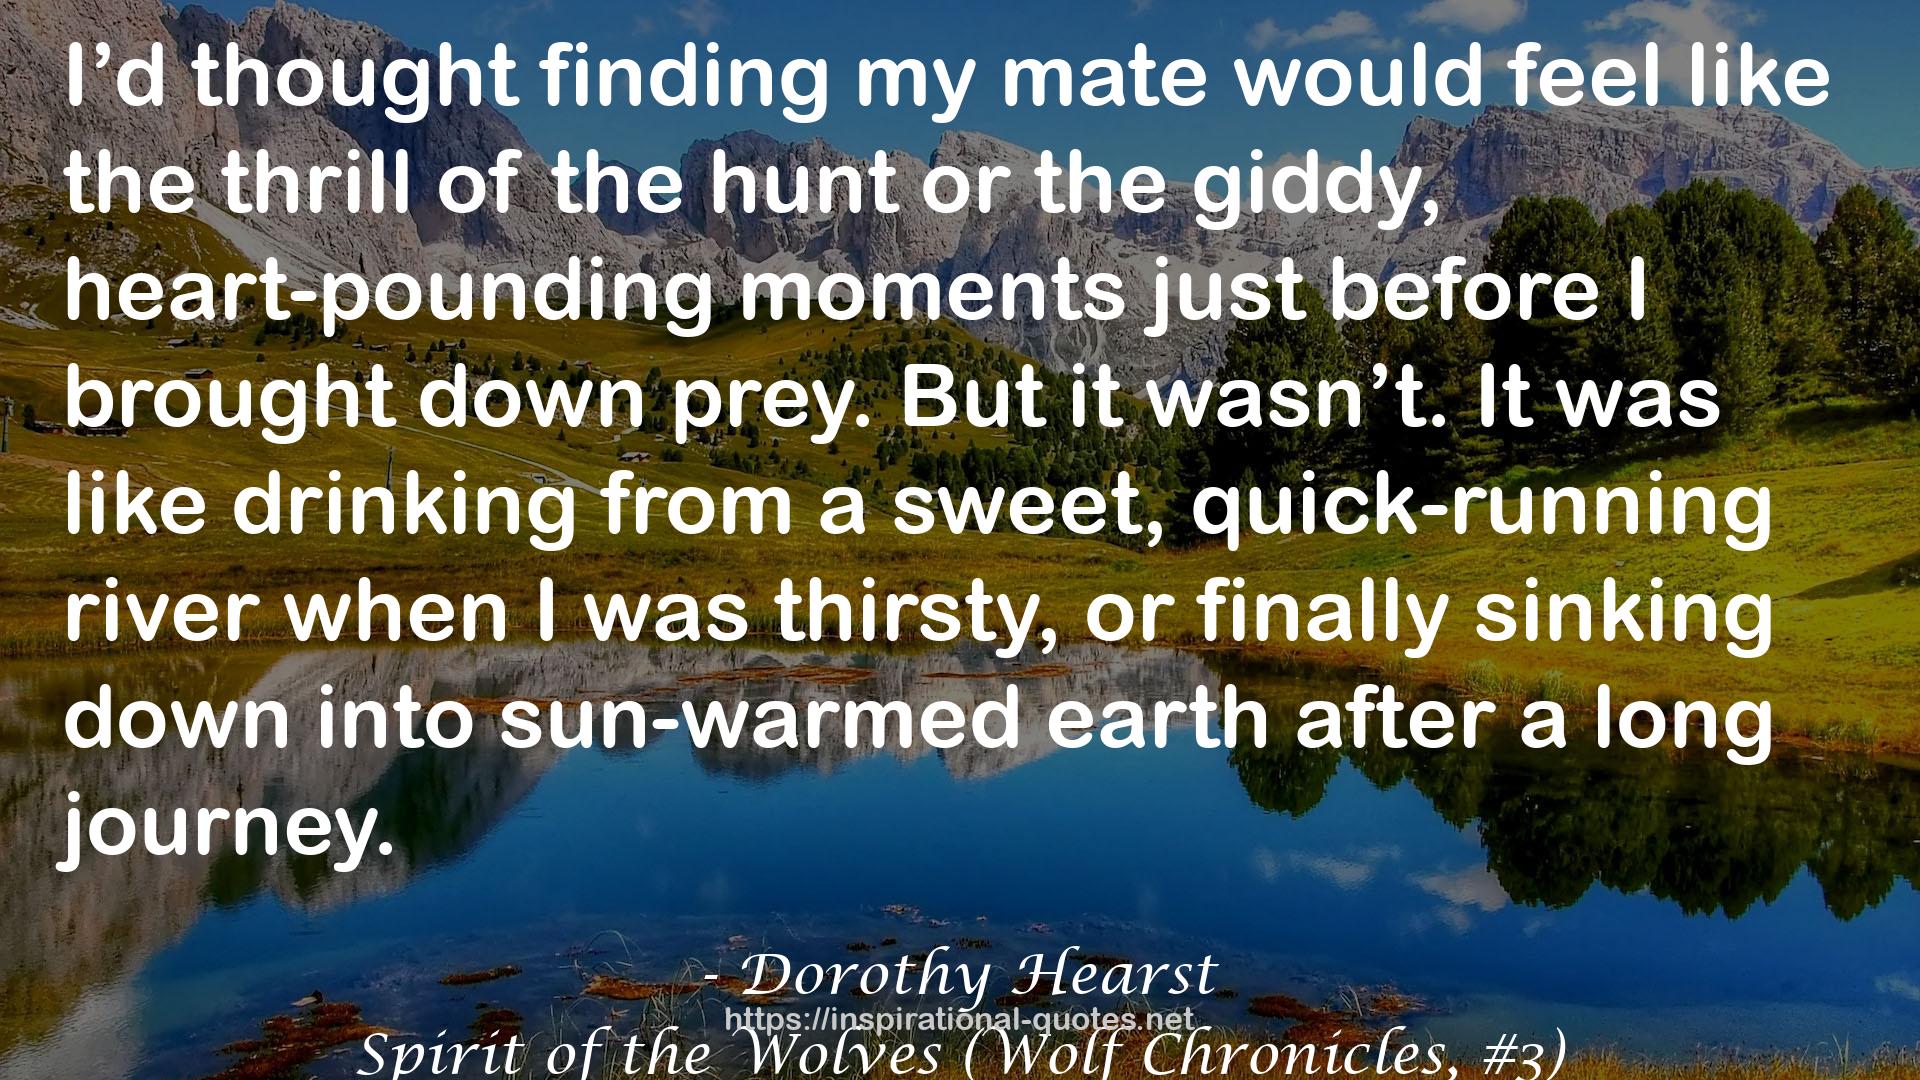 Dorothy Hearst QUOTES